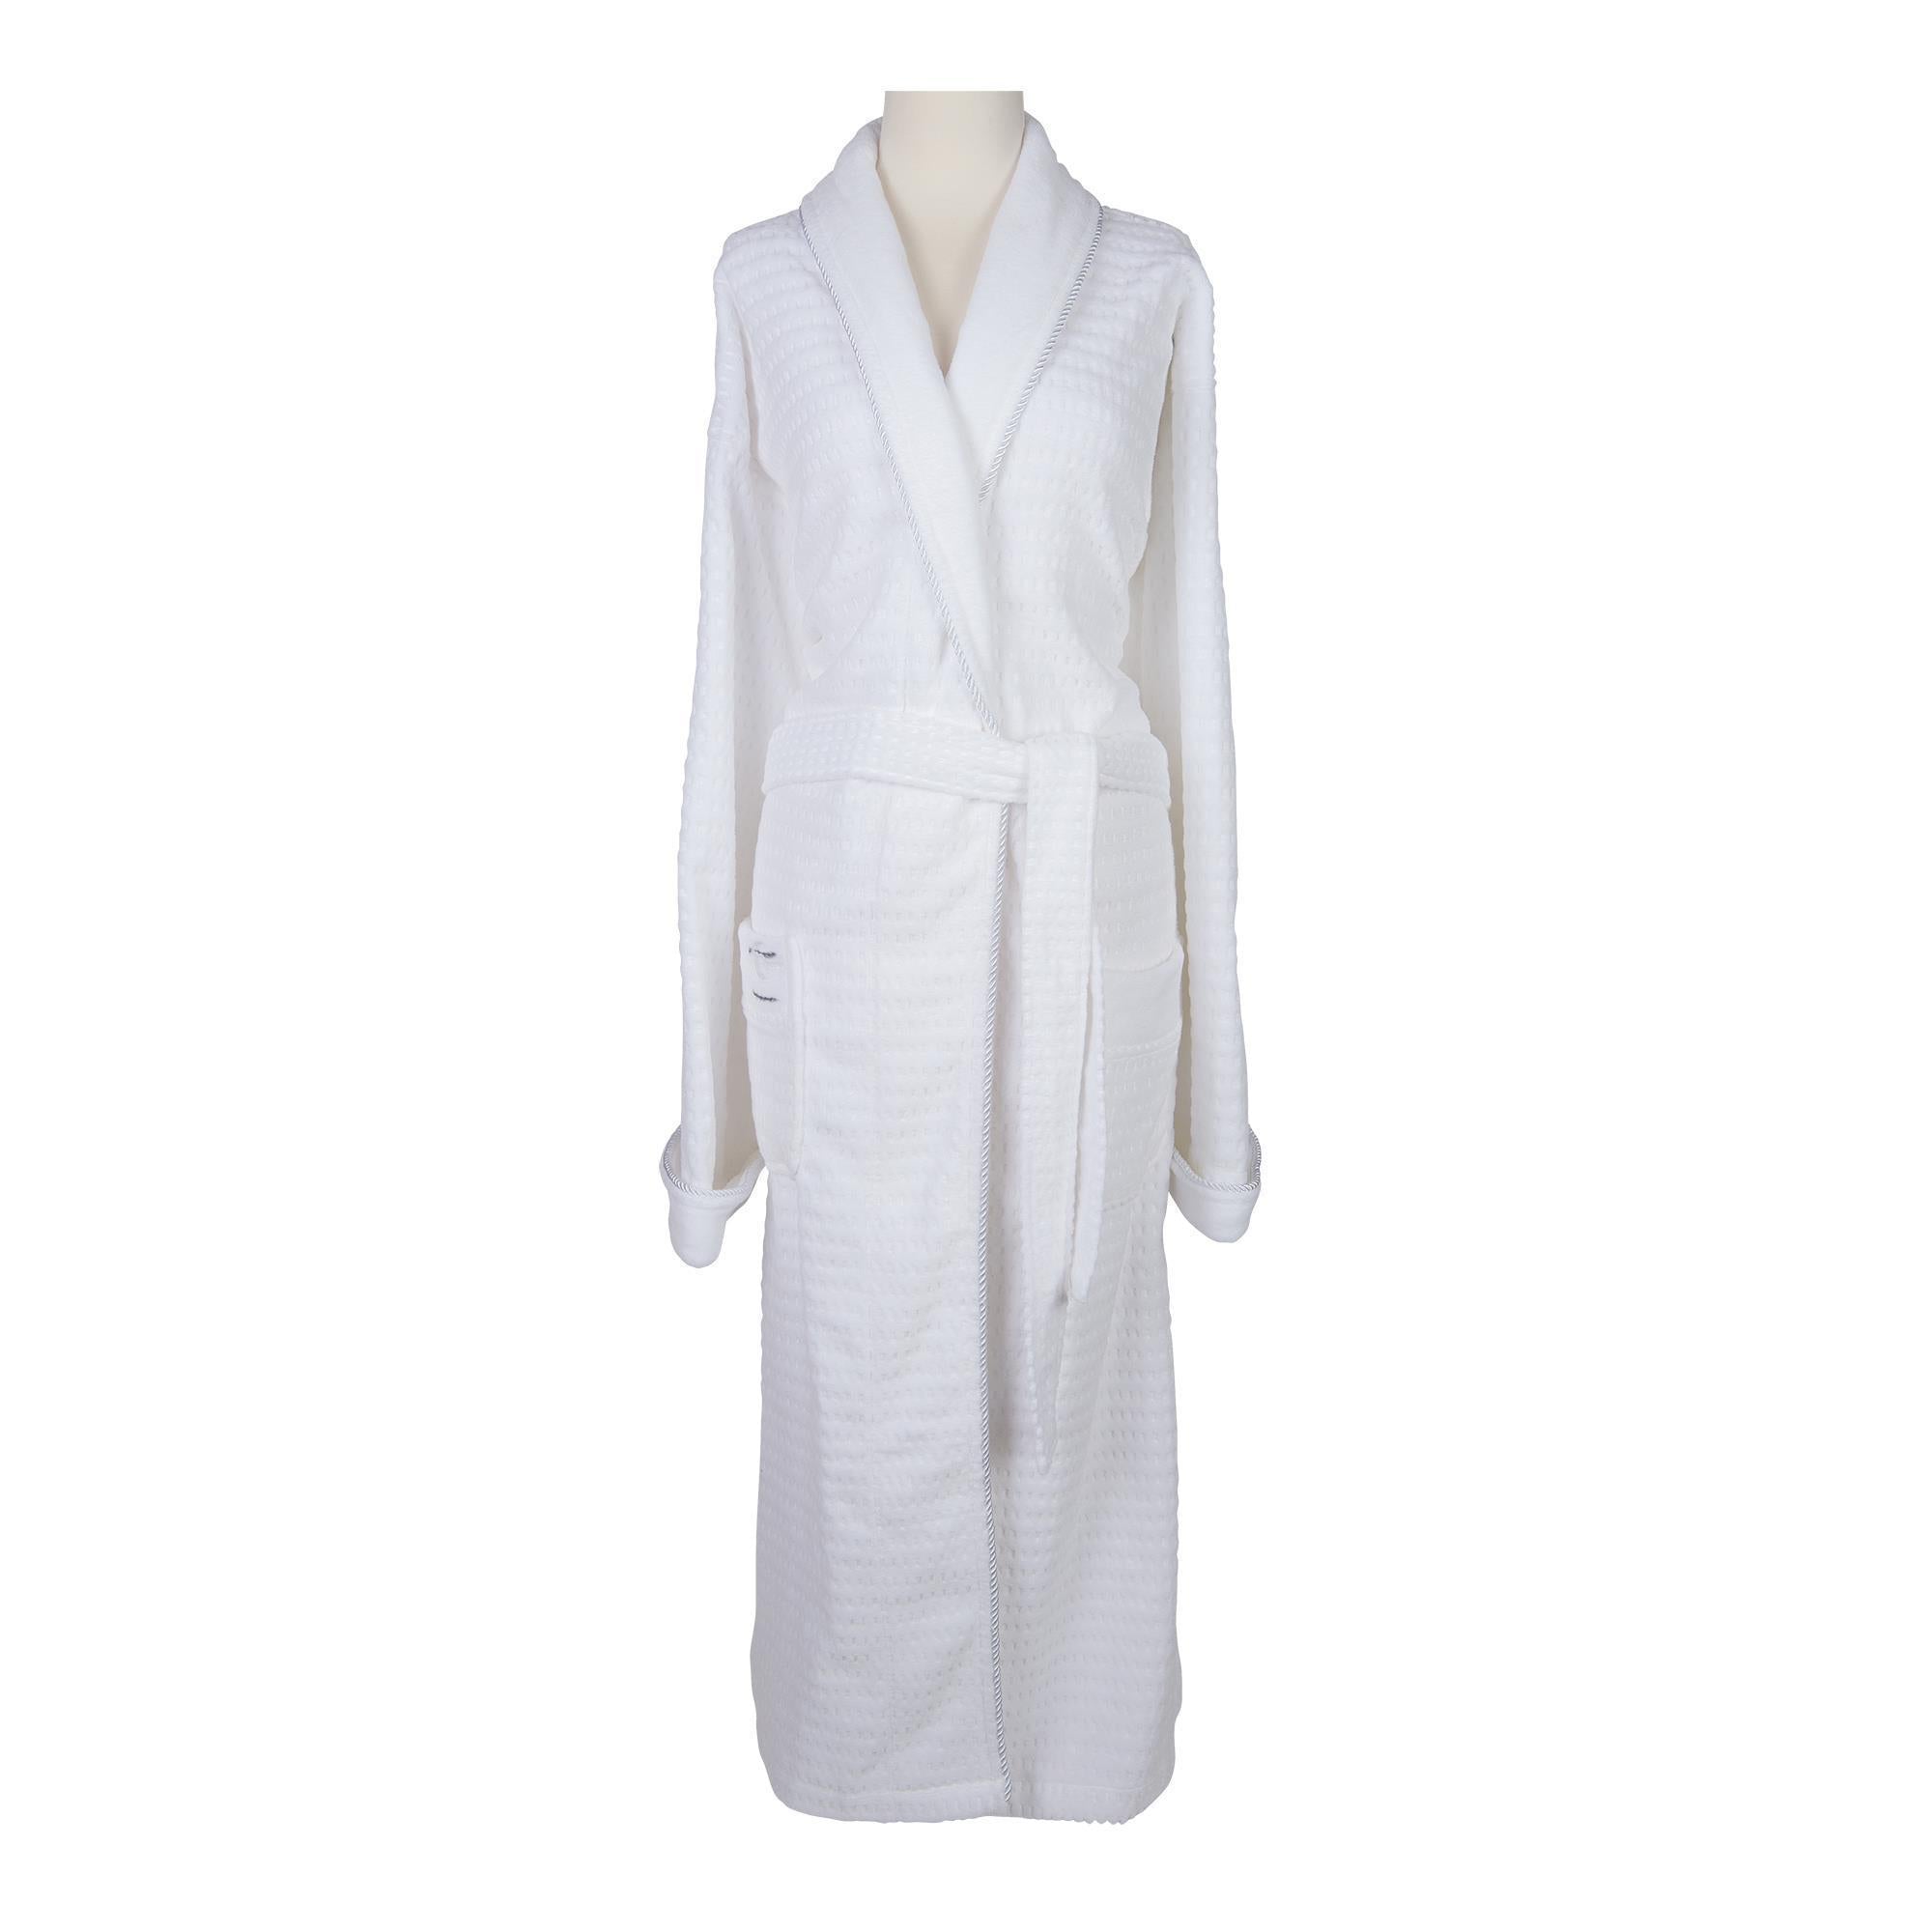 Robes & Wrapes One Size Fits All Sposh Regal Robe White with Silver Braided Trim